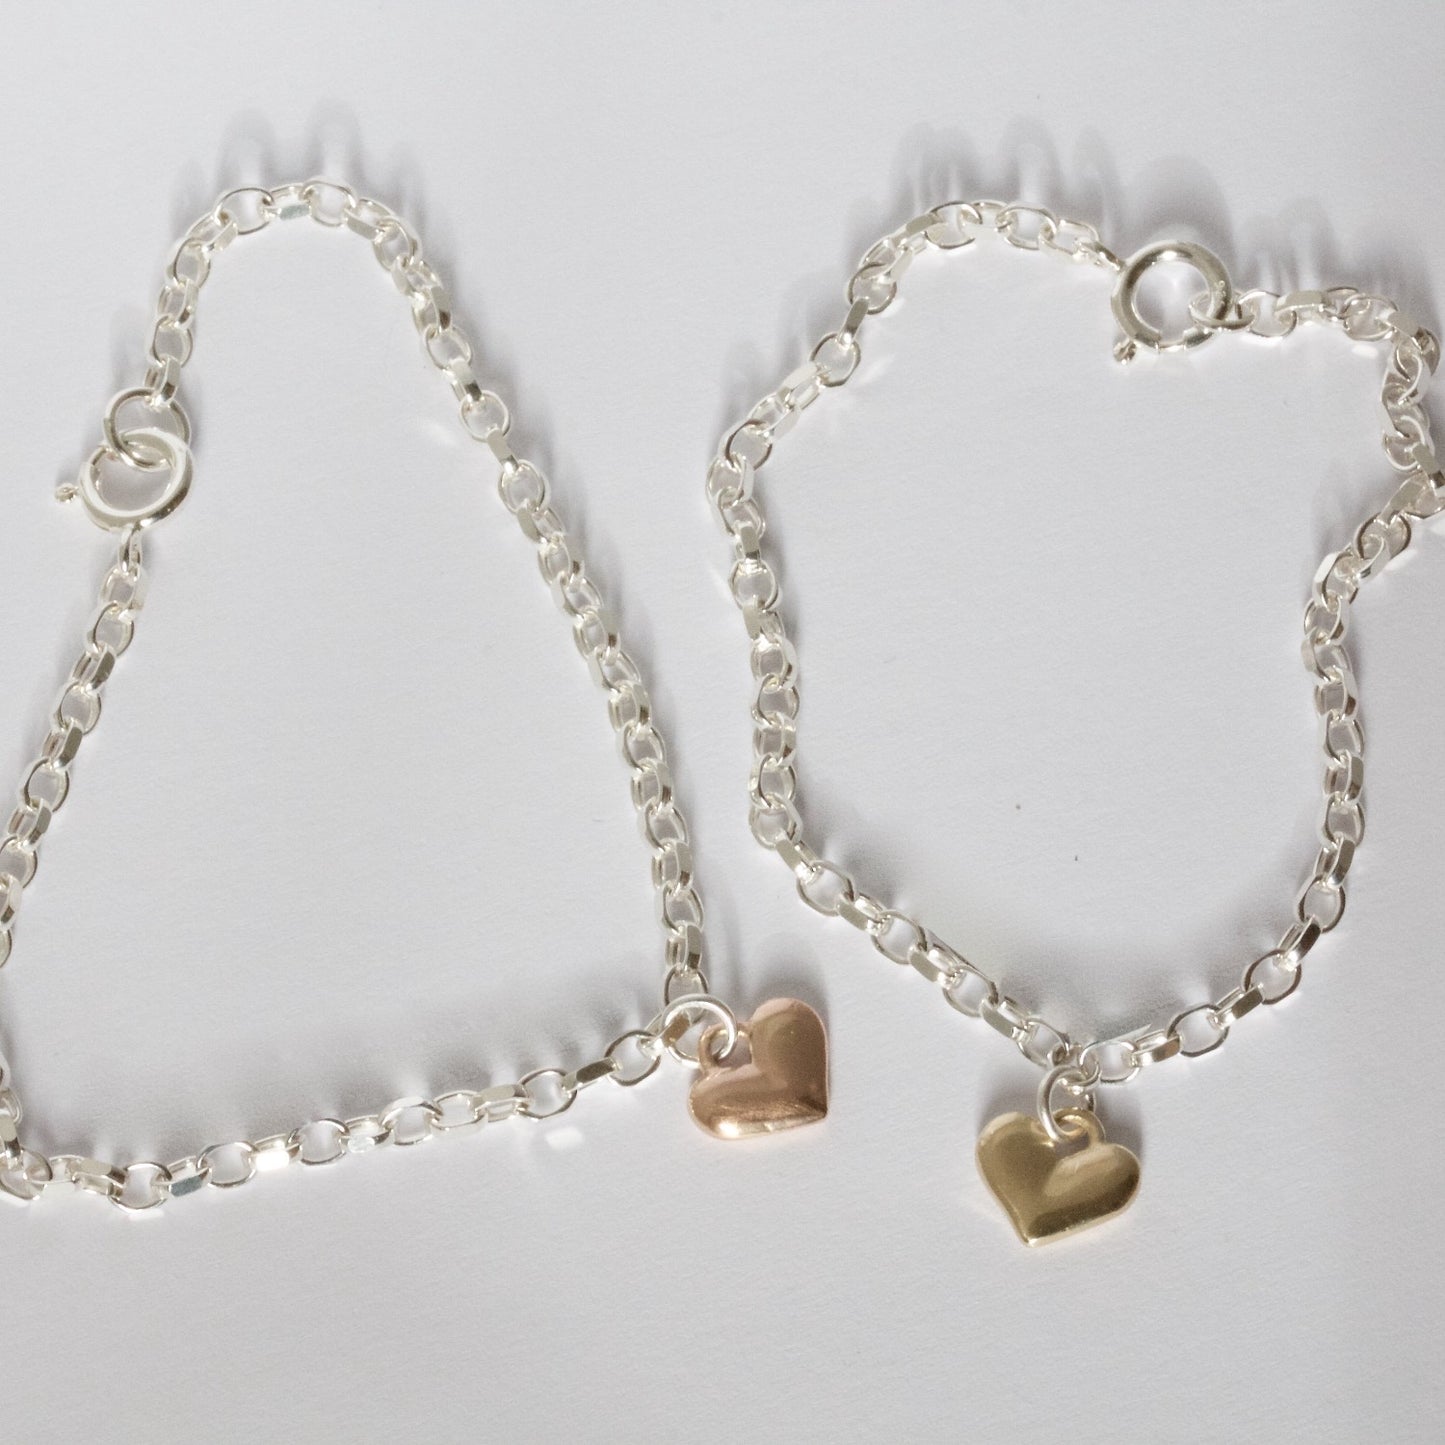 Love Heart Bracelet, Silver and Solid Gold